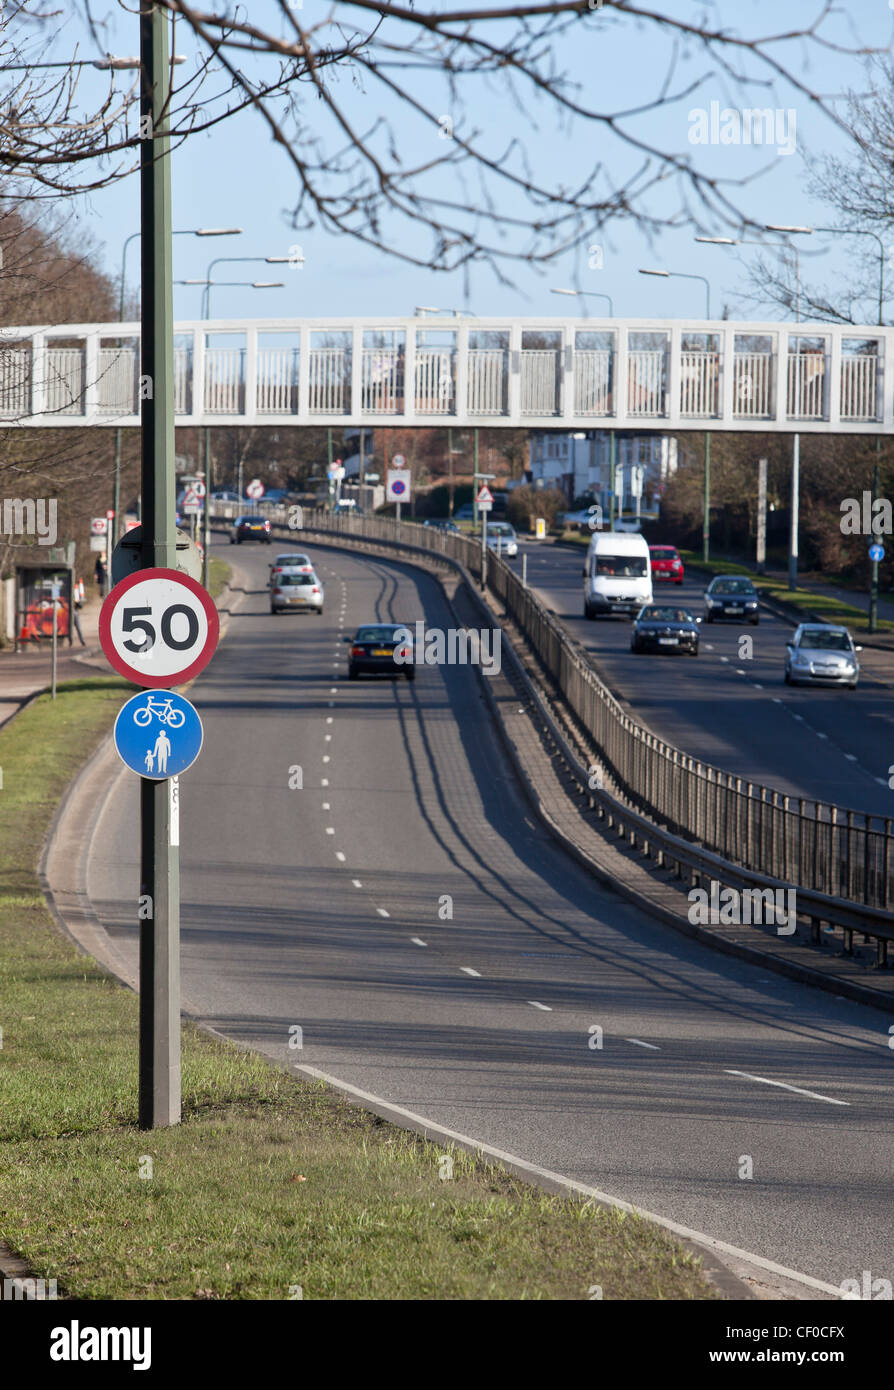 A stretch of the Edgware Way dual carriageway with a 50 mph speed limit on the roadside, Barnet, London, England, UK. Stock Photo